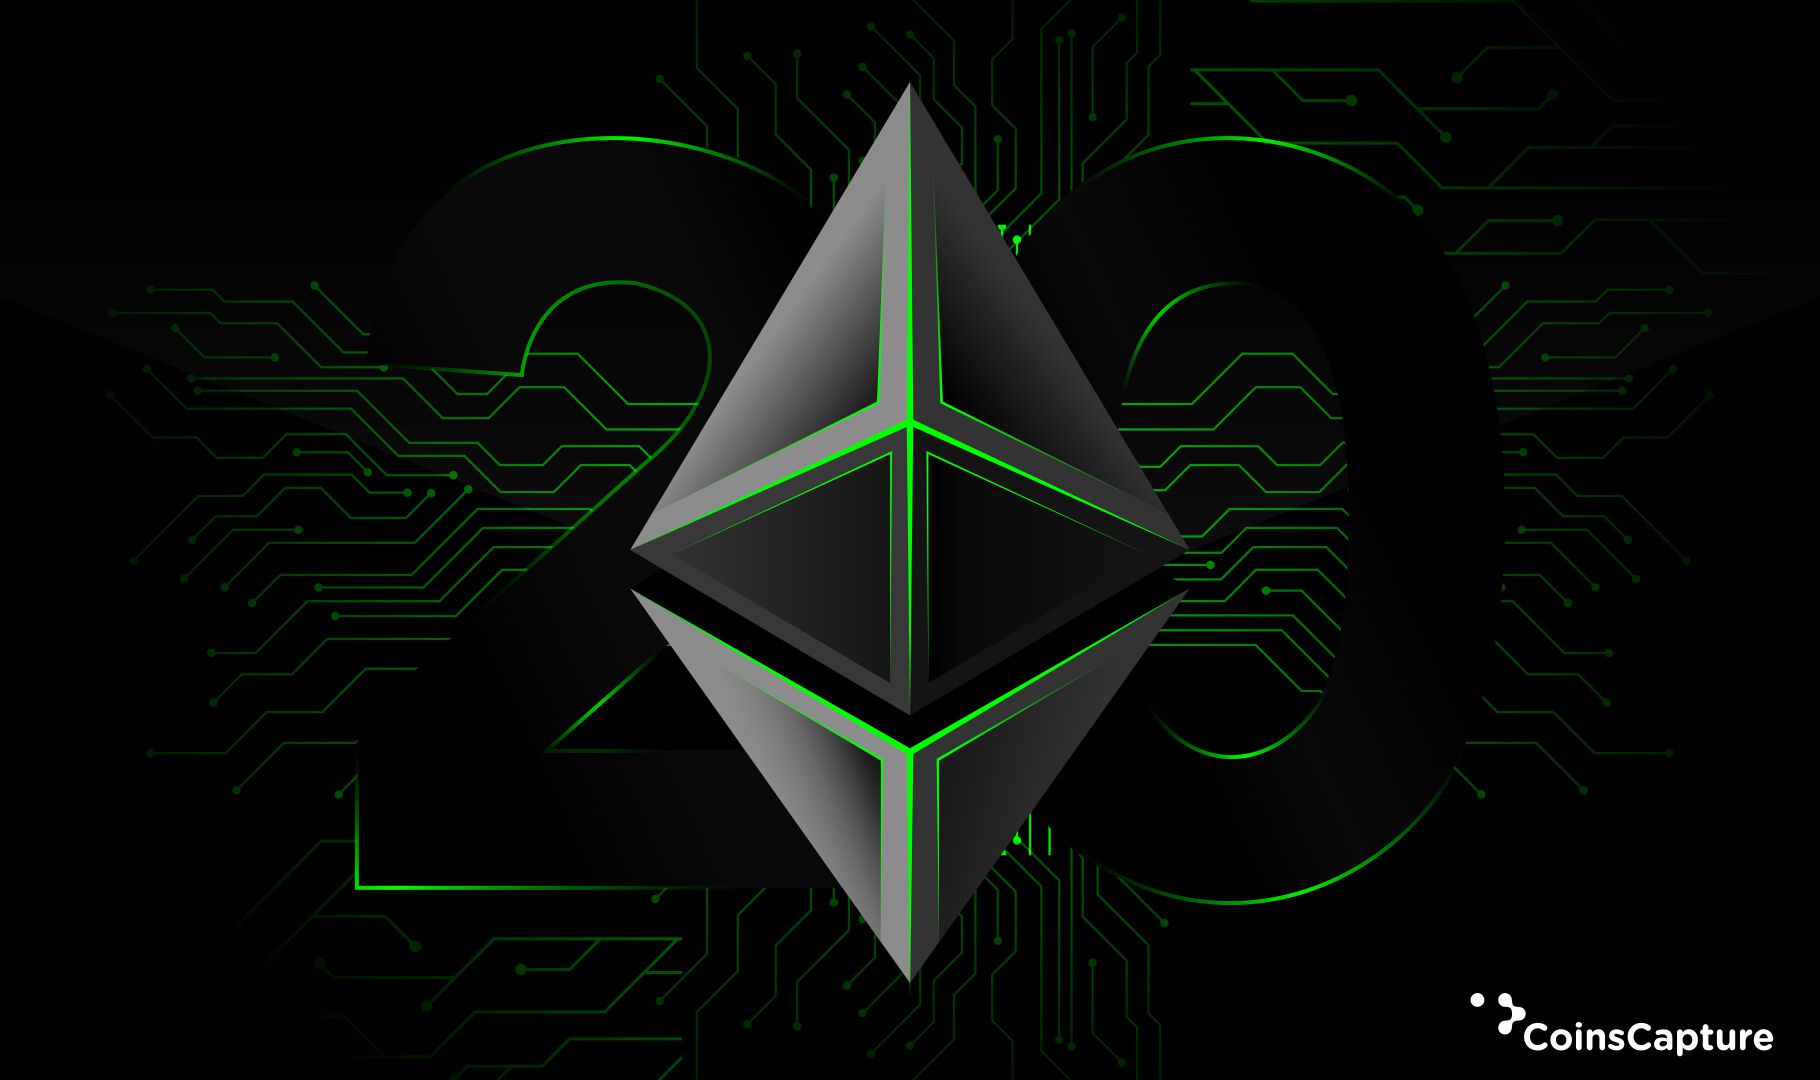 All you need to know about Ethereum 2.0